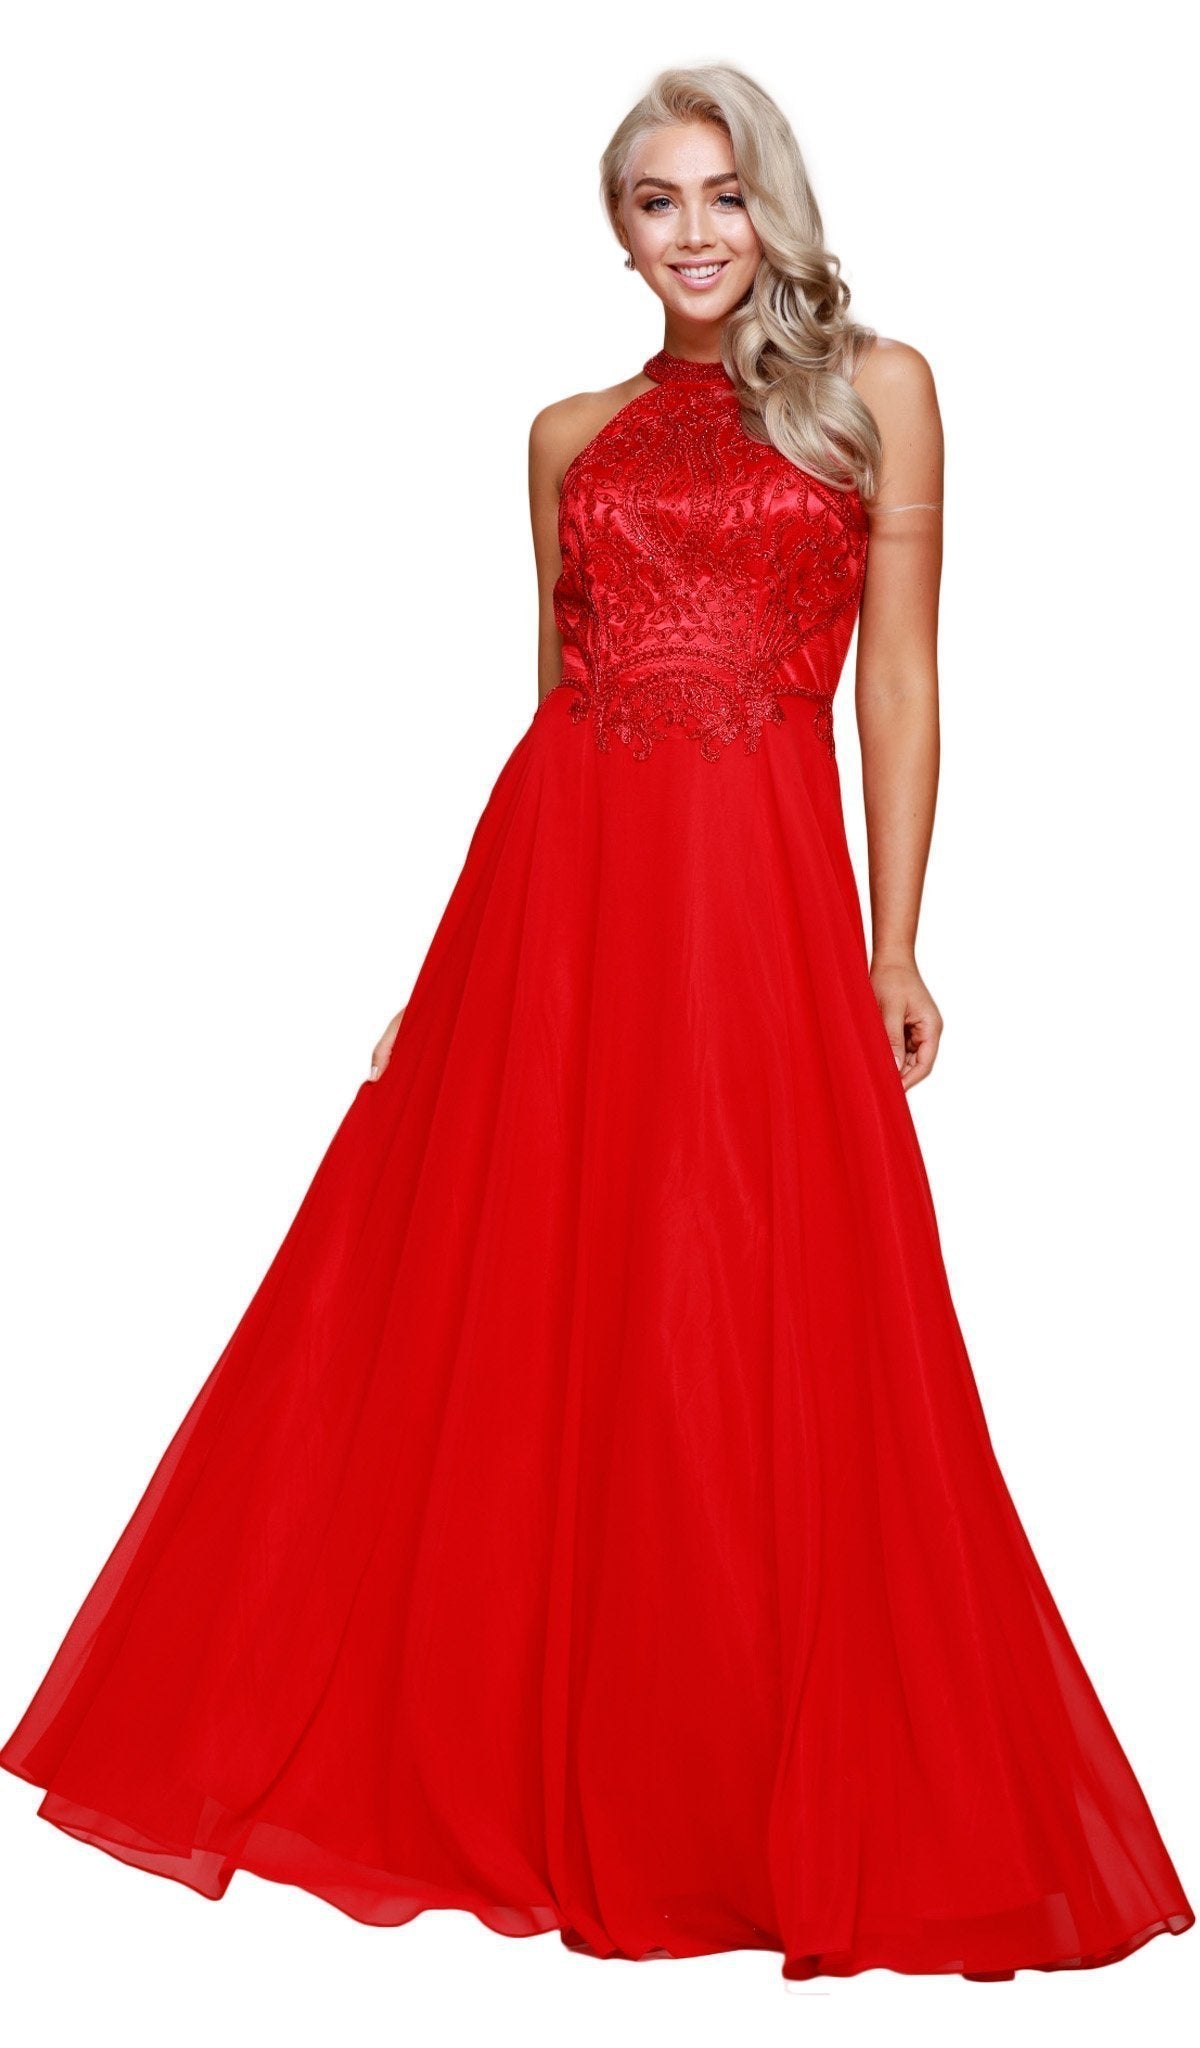 Nox Anabel - J117 Embroidered Halter Chiffon A-line Dress Special Occasion Dress XS / Red